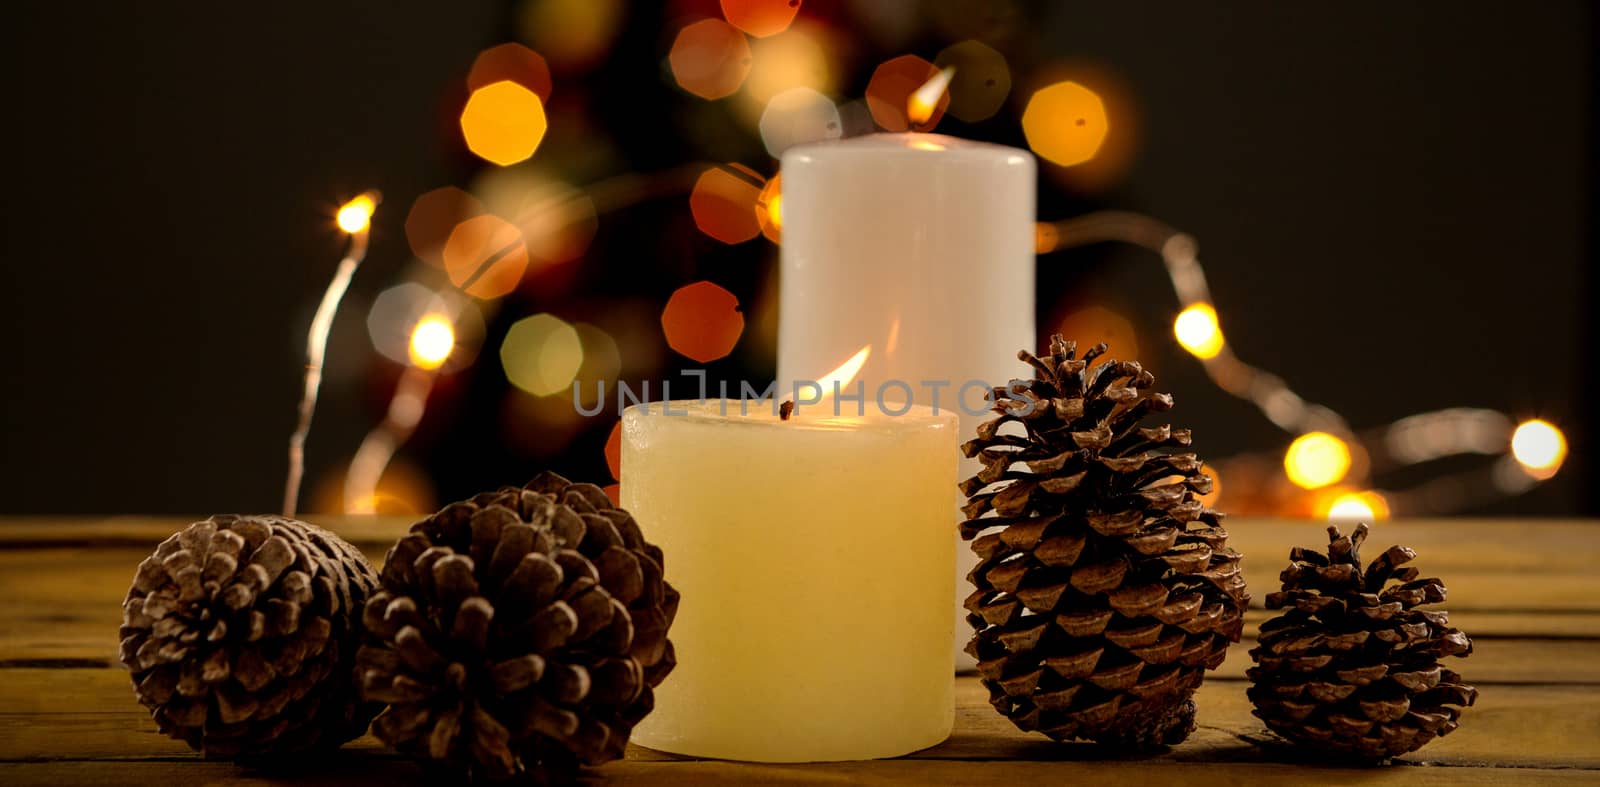 Close up of pine cones with illuminated candles on table against christmas balls against unfocused tree